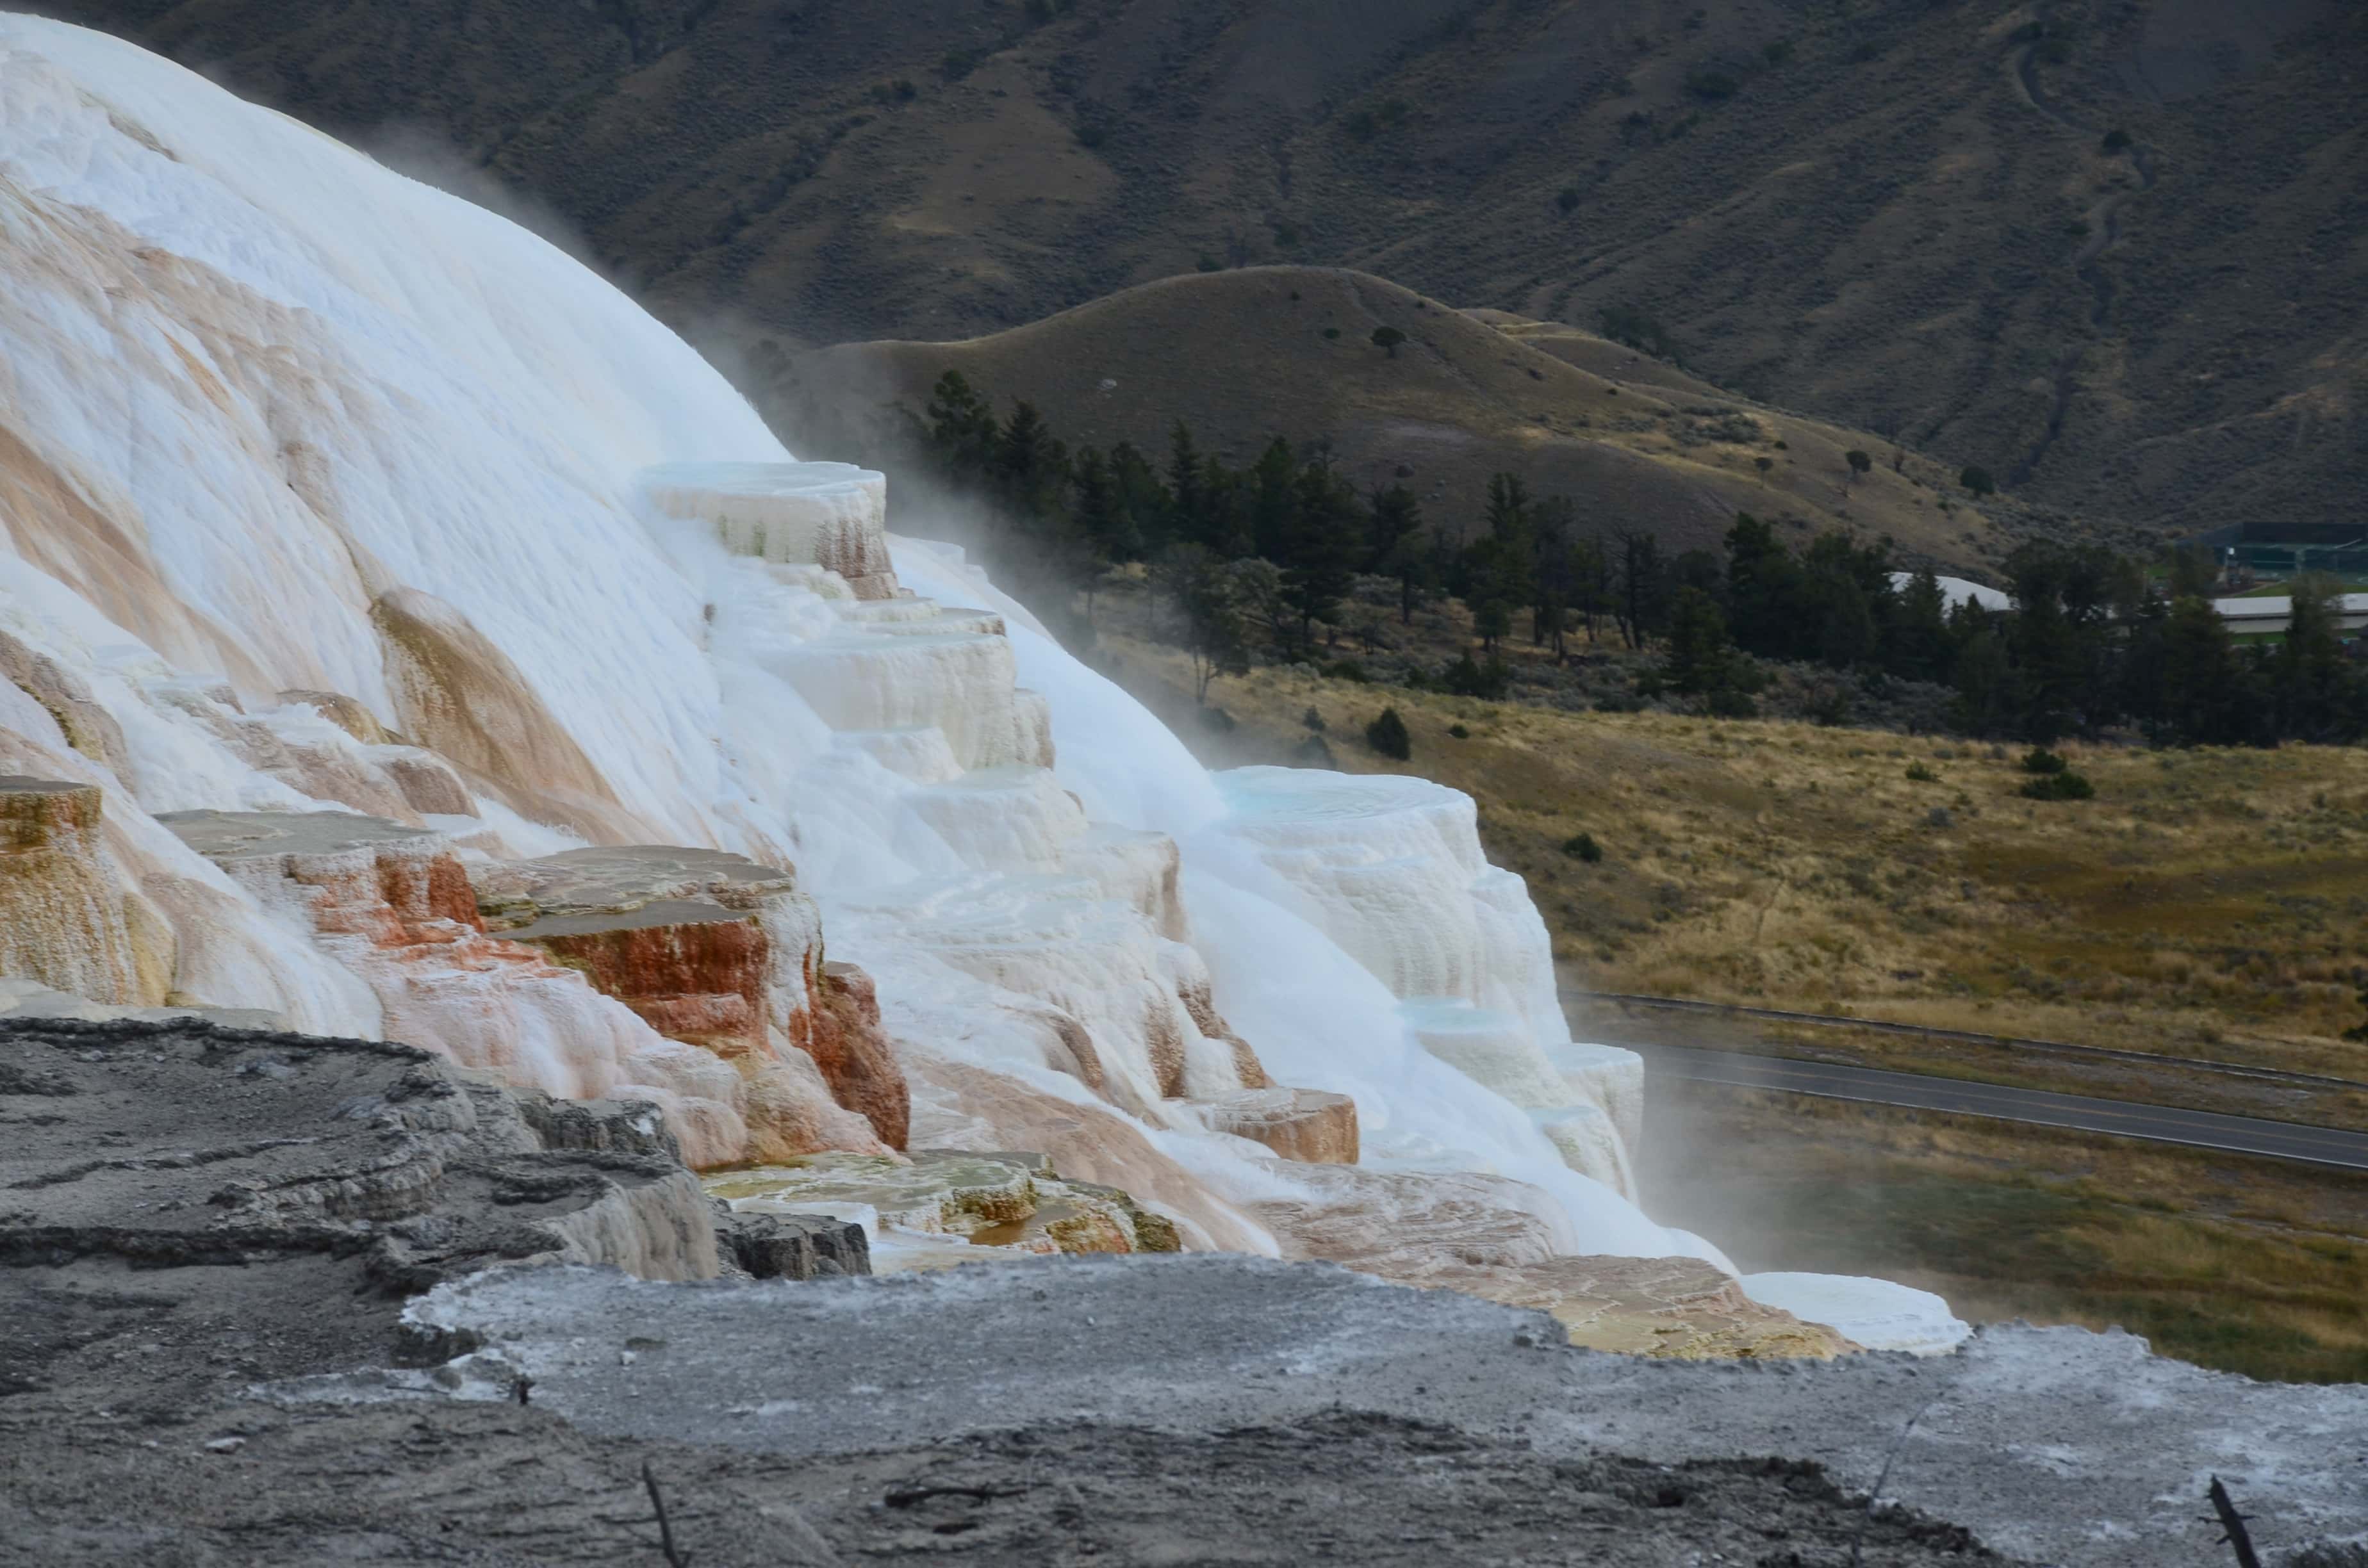 Canary Spring at Mammoth Hot Springs in Yellowstone National Park, Wyoming